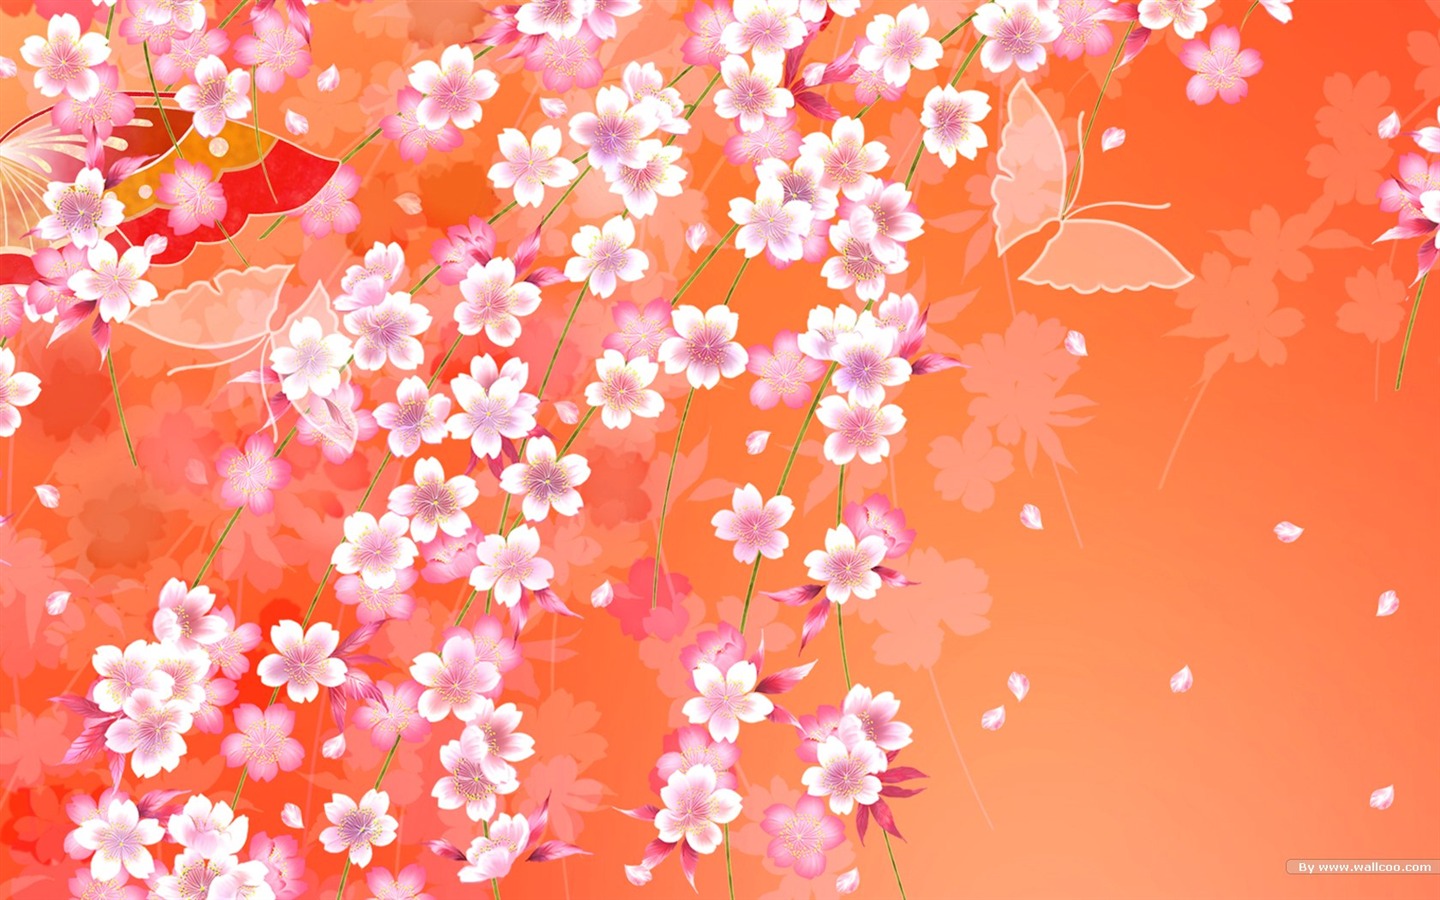 Japan style wallpaper pattern and color #1 - 1440x900